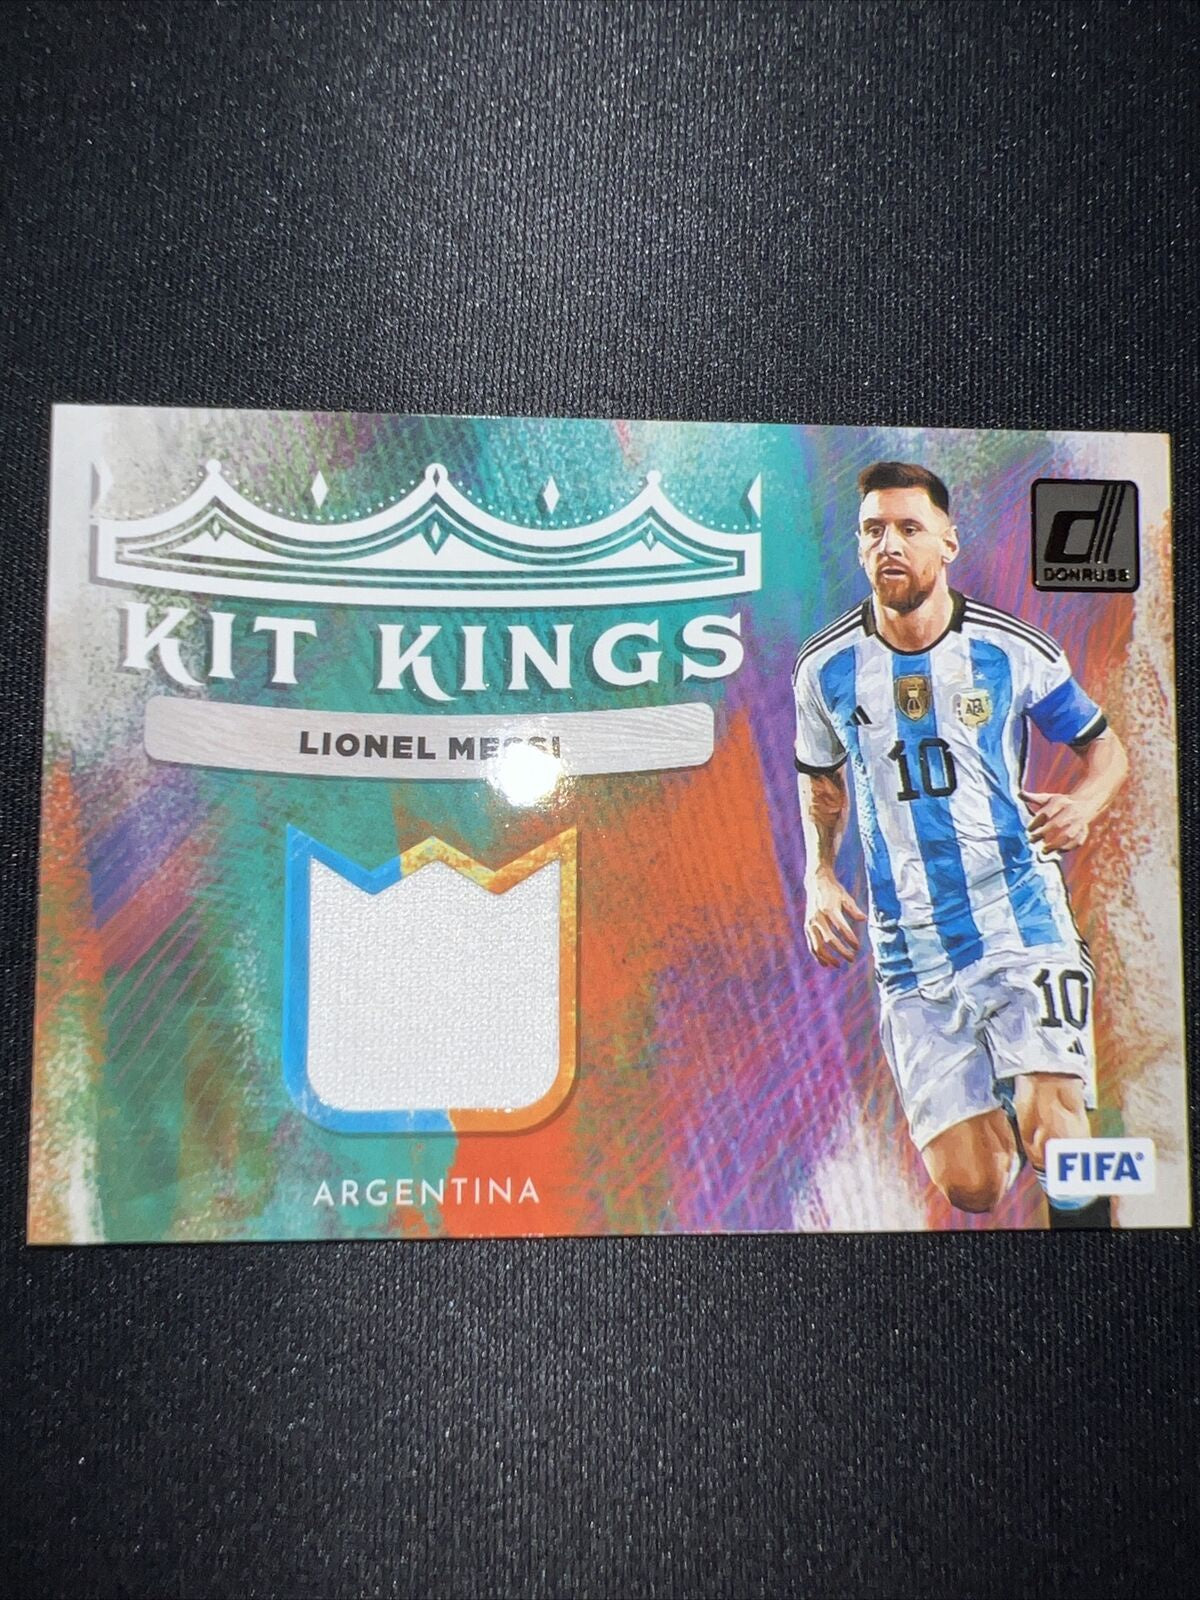 Lionel Messi - Officially Licensed Material Card Sports Card Single (Randomly Selected, May Not Be Pictured)